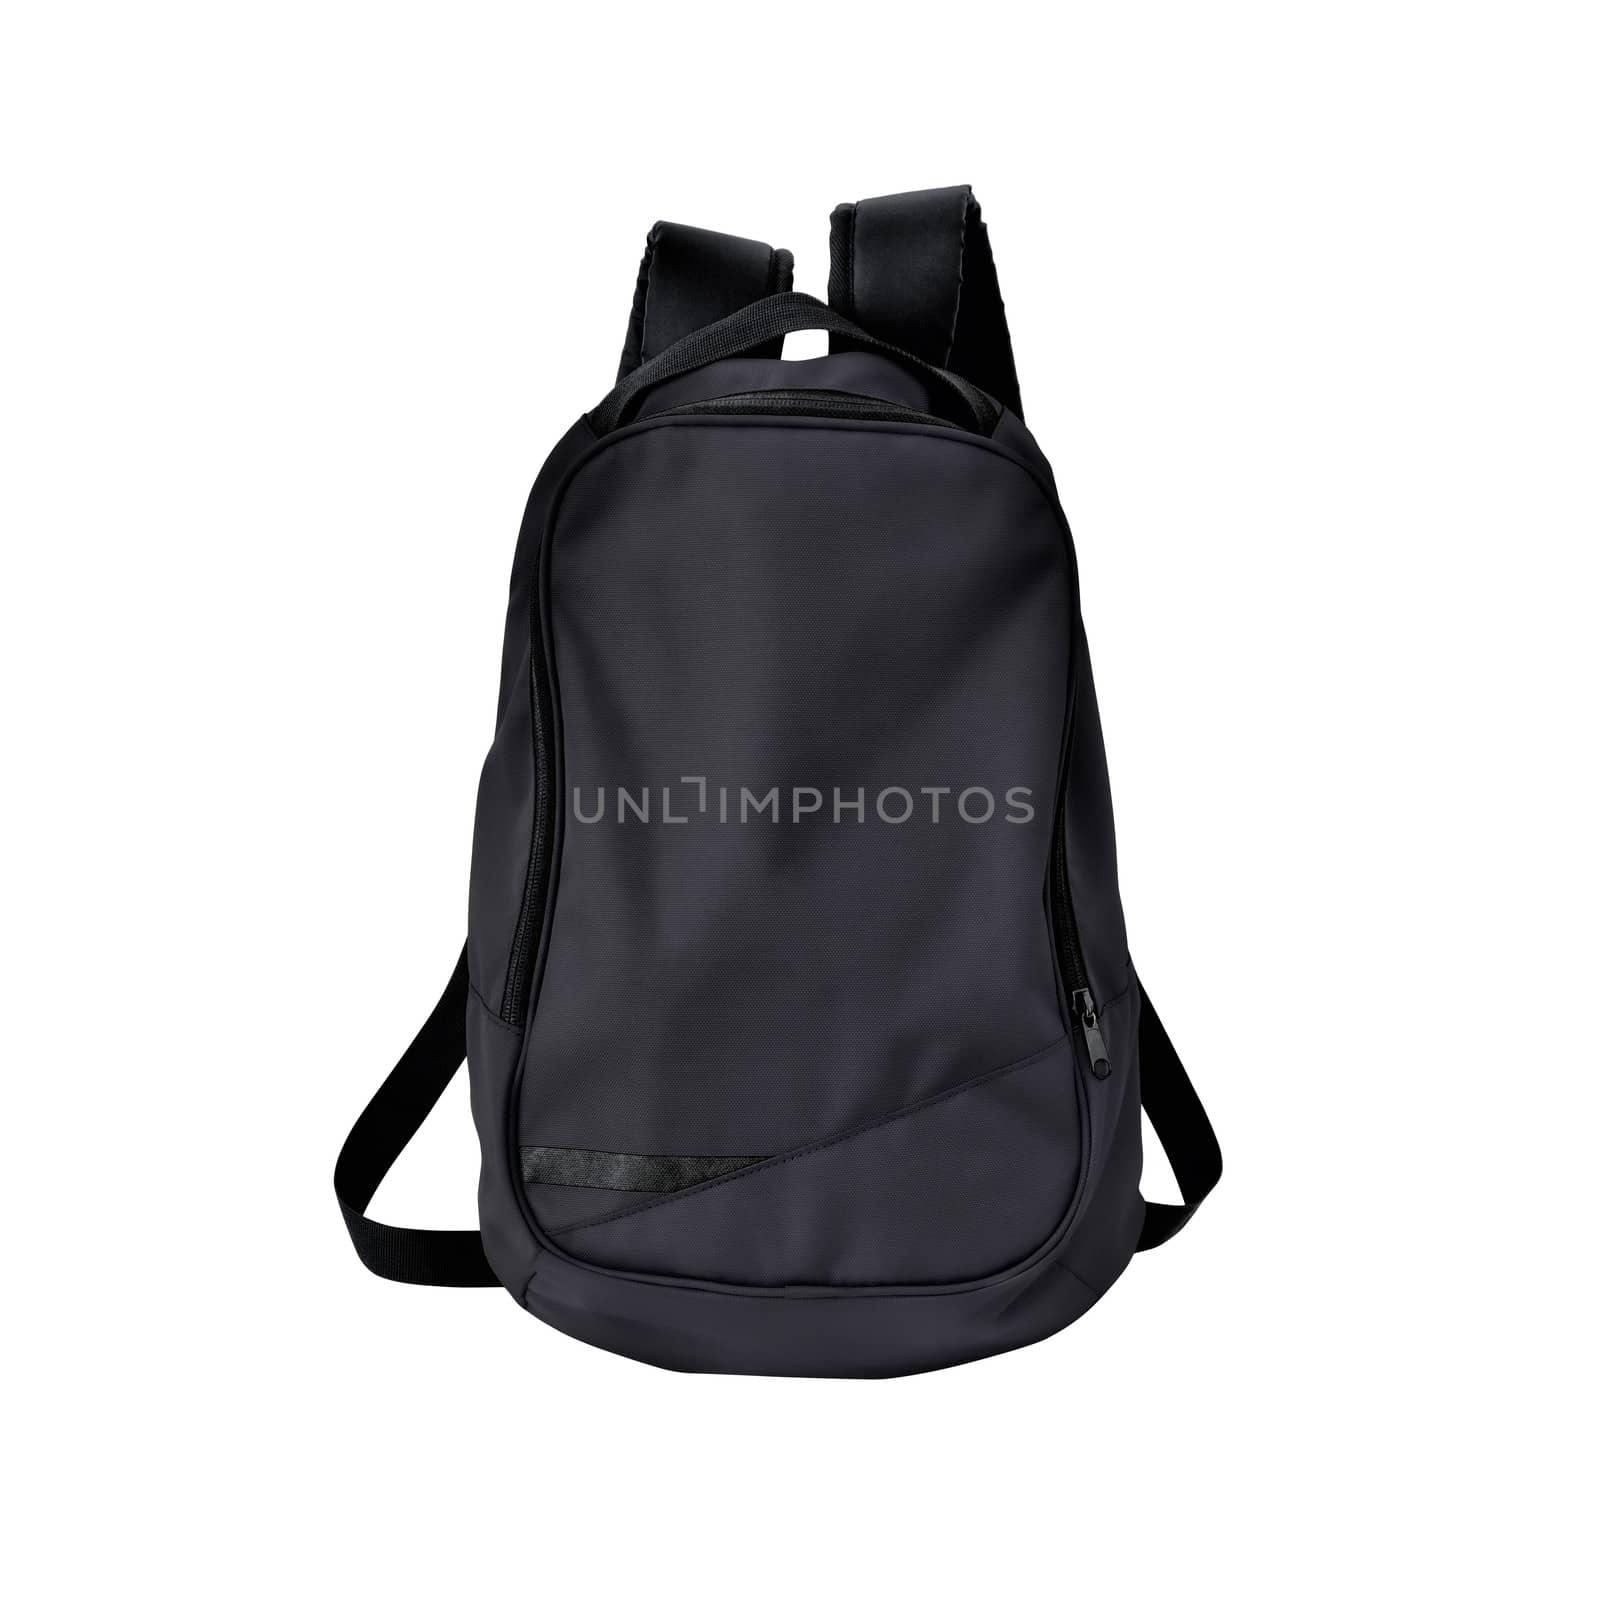 A high-resolution image of an isolated black-colored rucksack on white background. High-quality clipping path included.